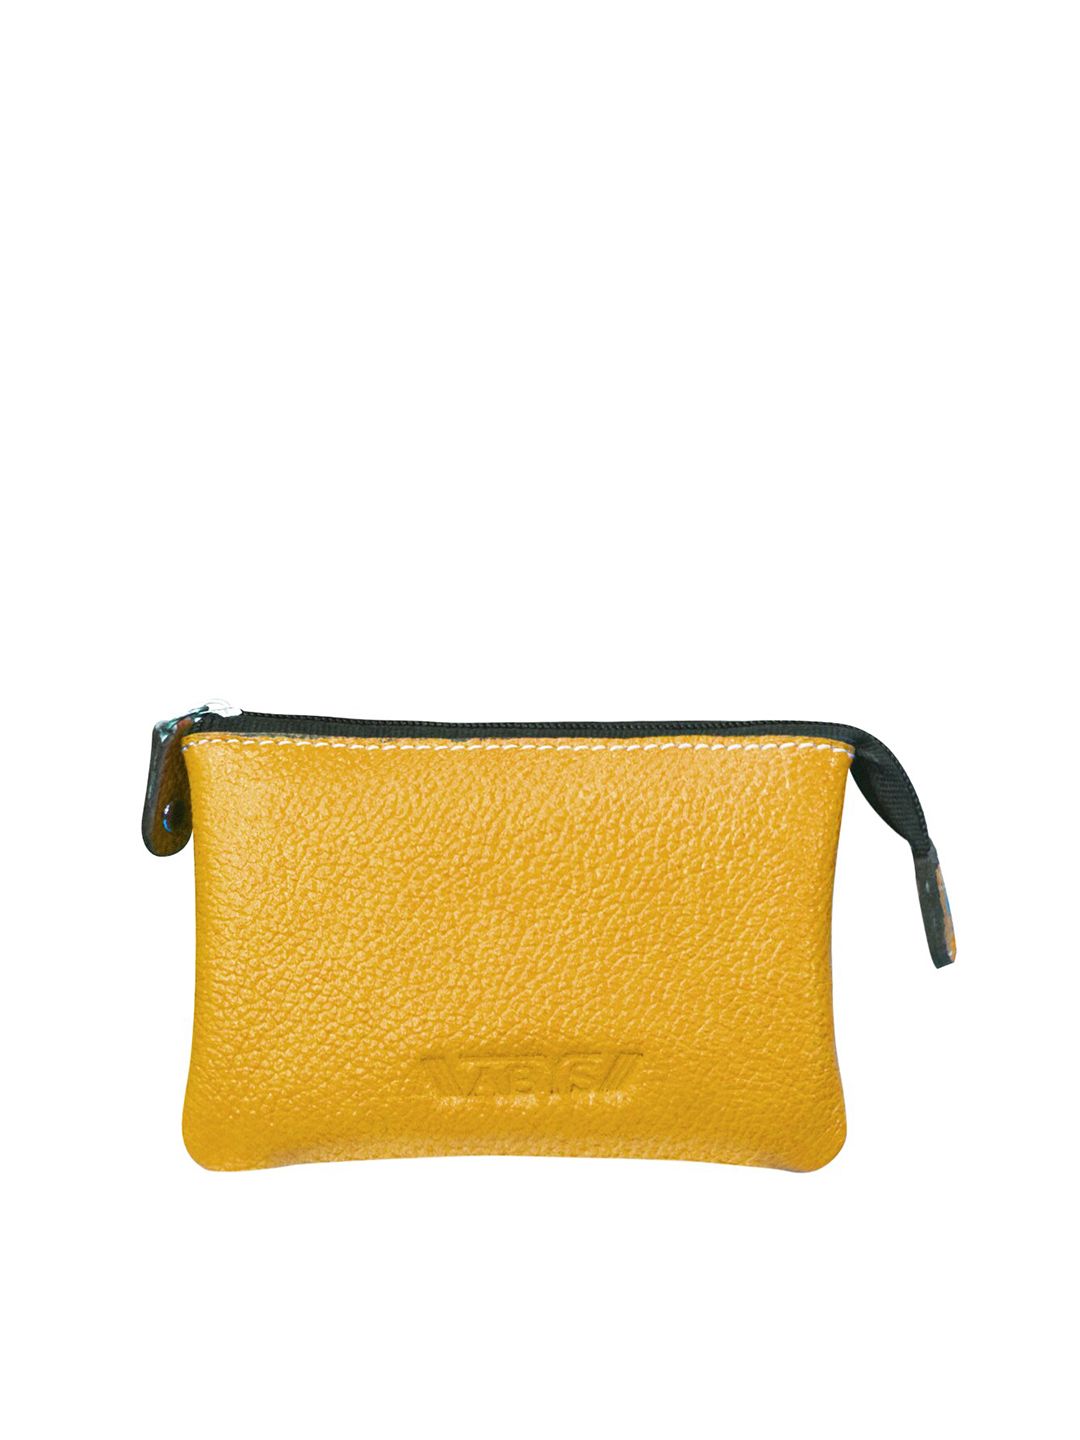 ABYS Unisex Yellow & Yellow Leather Card Holder with SD Card Holder Price in India